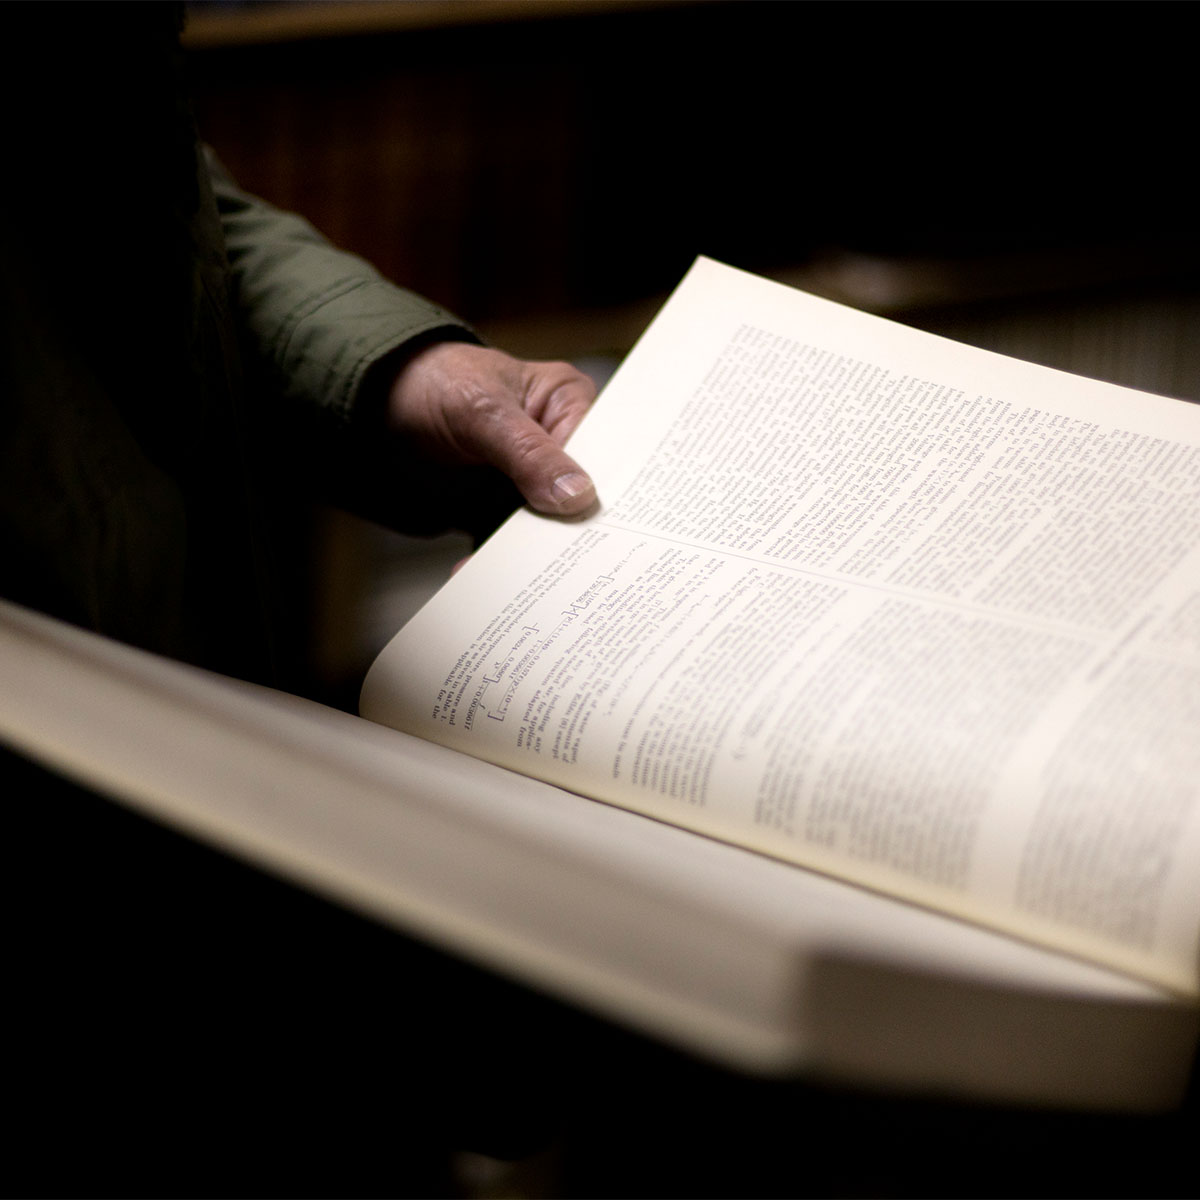 A person holds a large textbook in one hand in a dimly lit room.